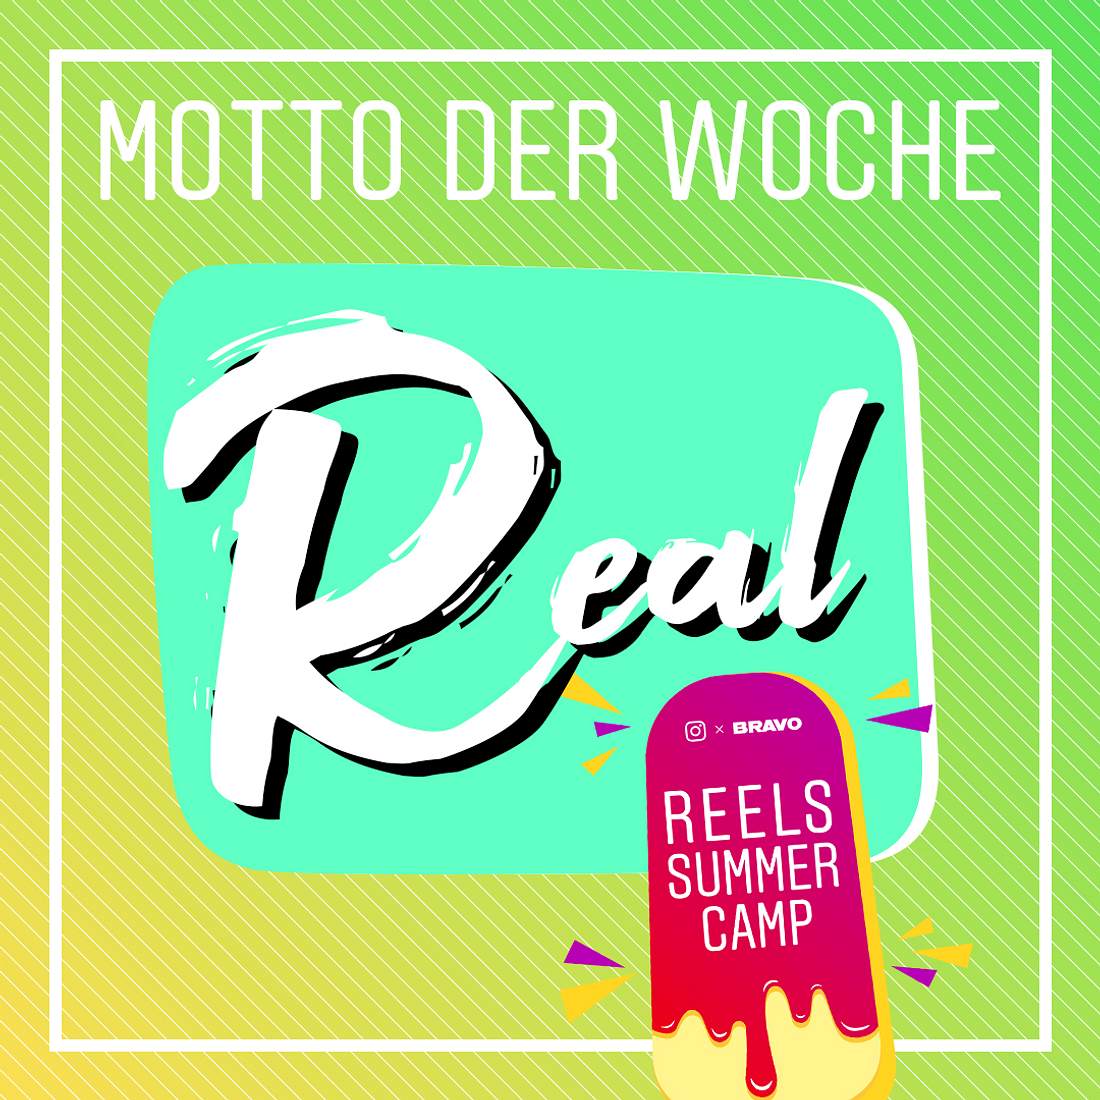 Just be you – just be REAL with REELS! Die Aktionswoche REAL geht vom 5.8.20 bis einschließlich 12.8.2020!